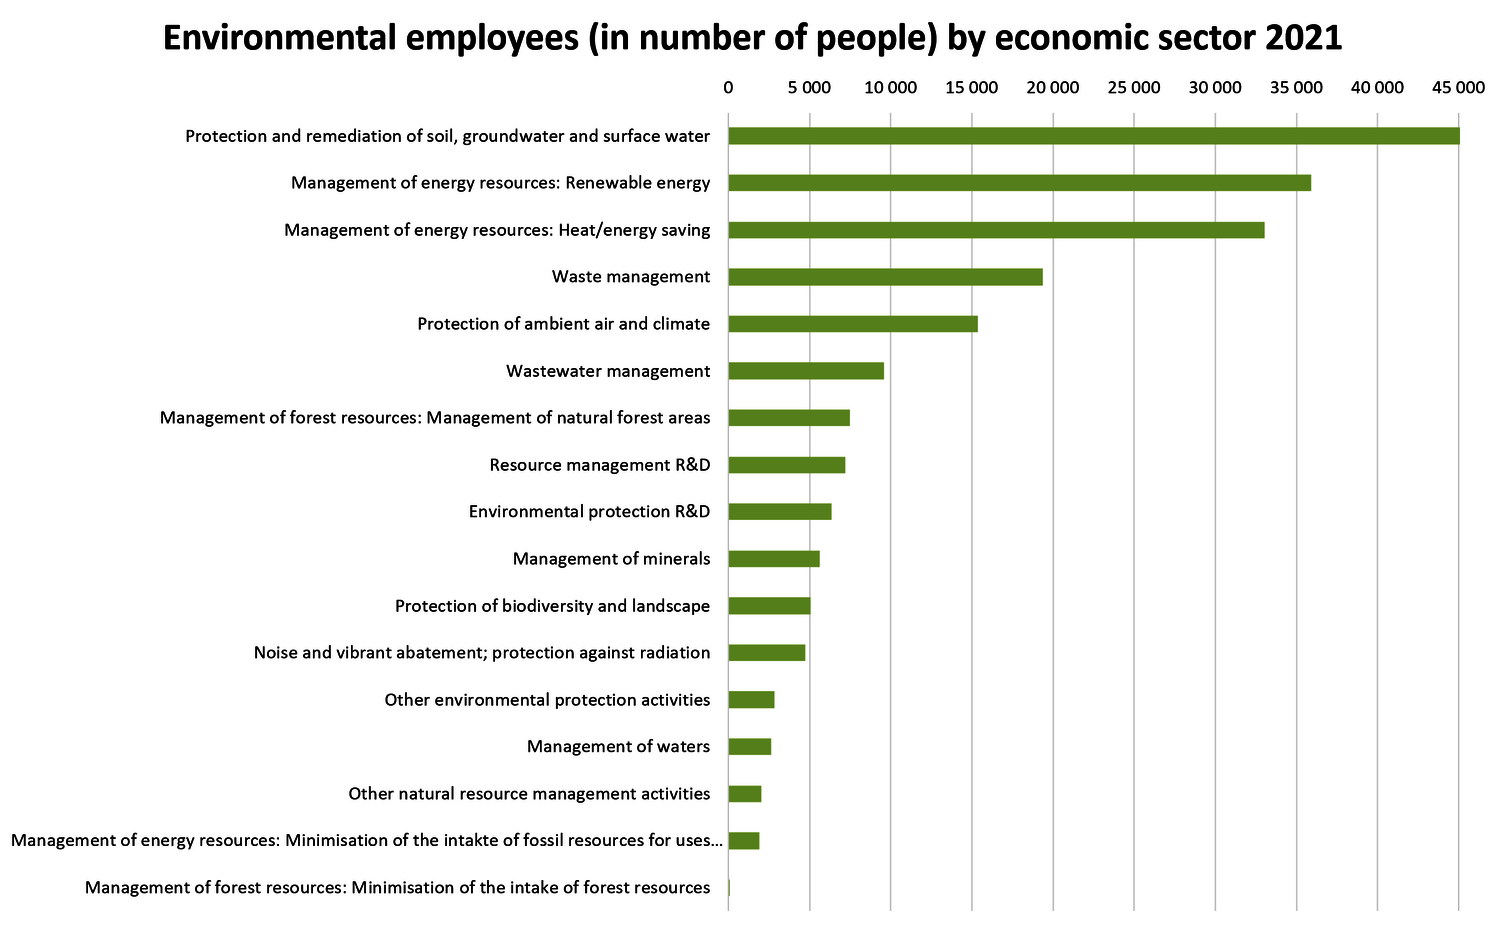 Diagram with figures about environmental employees in Austria in 2021